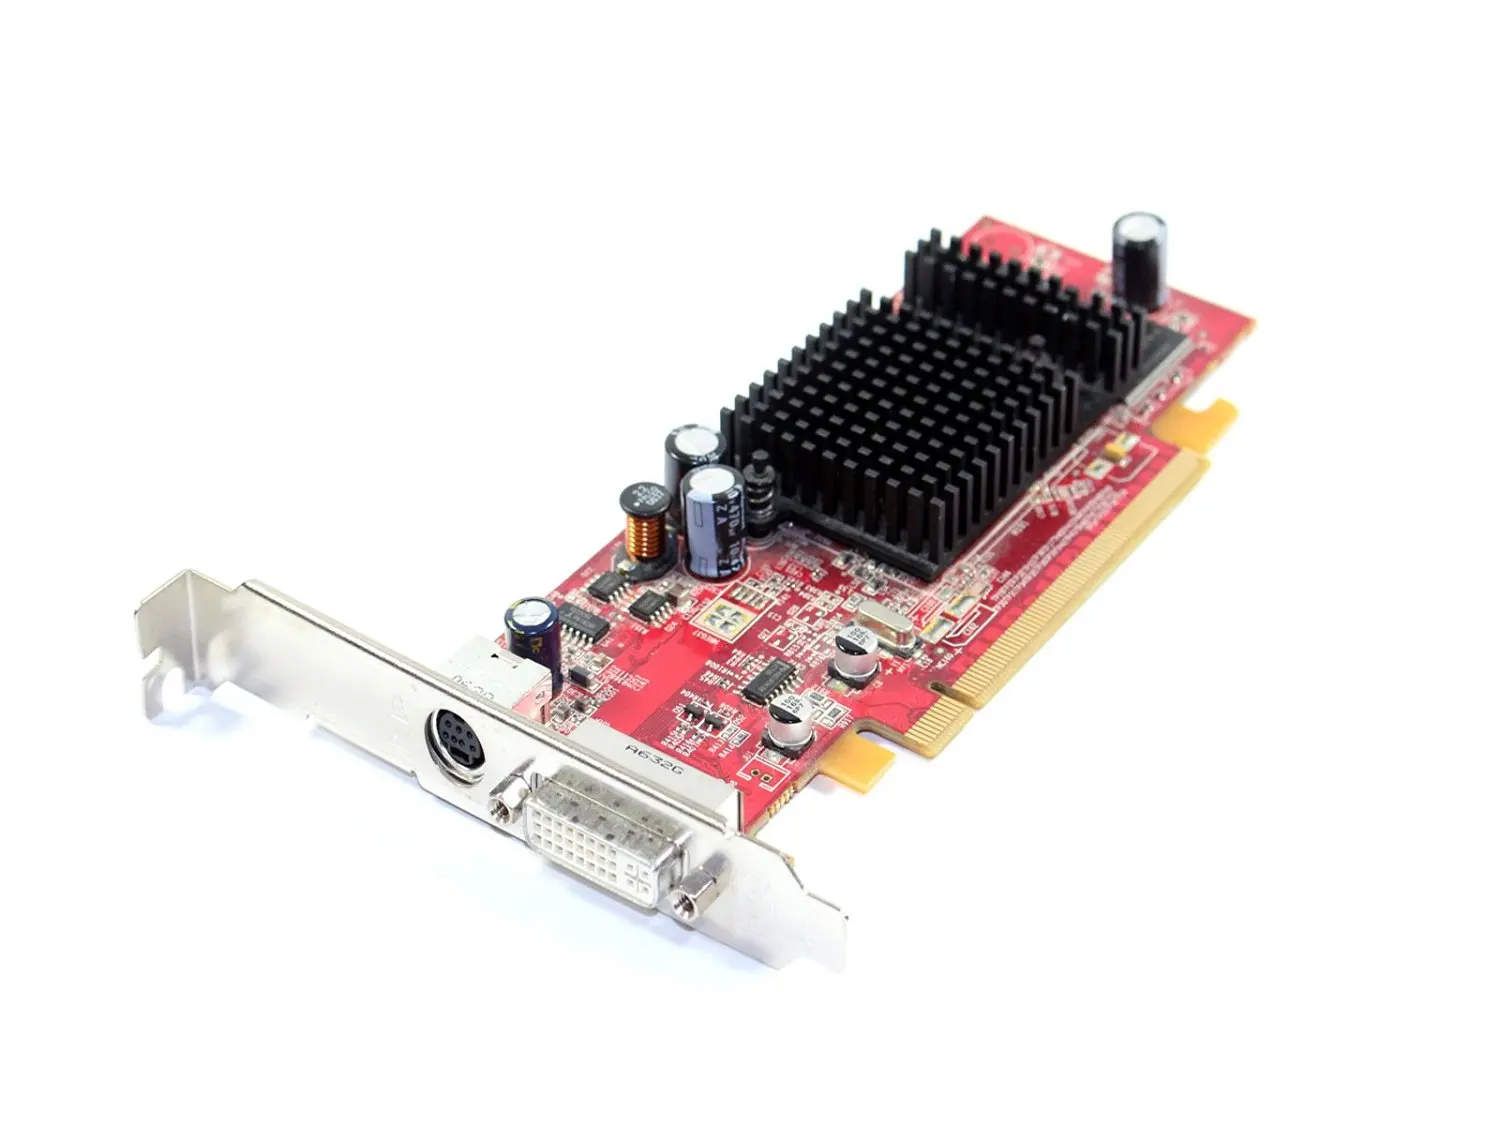 opengl 3.3 compatible video card